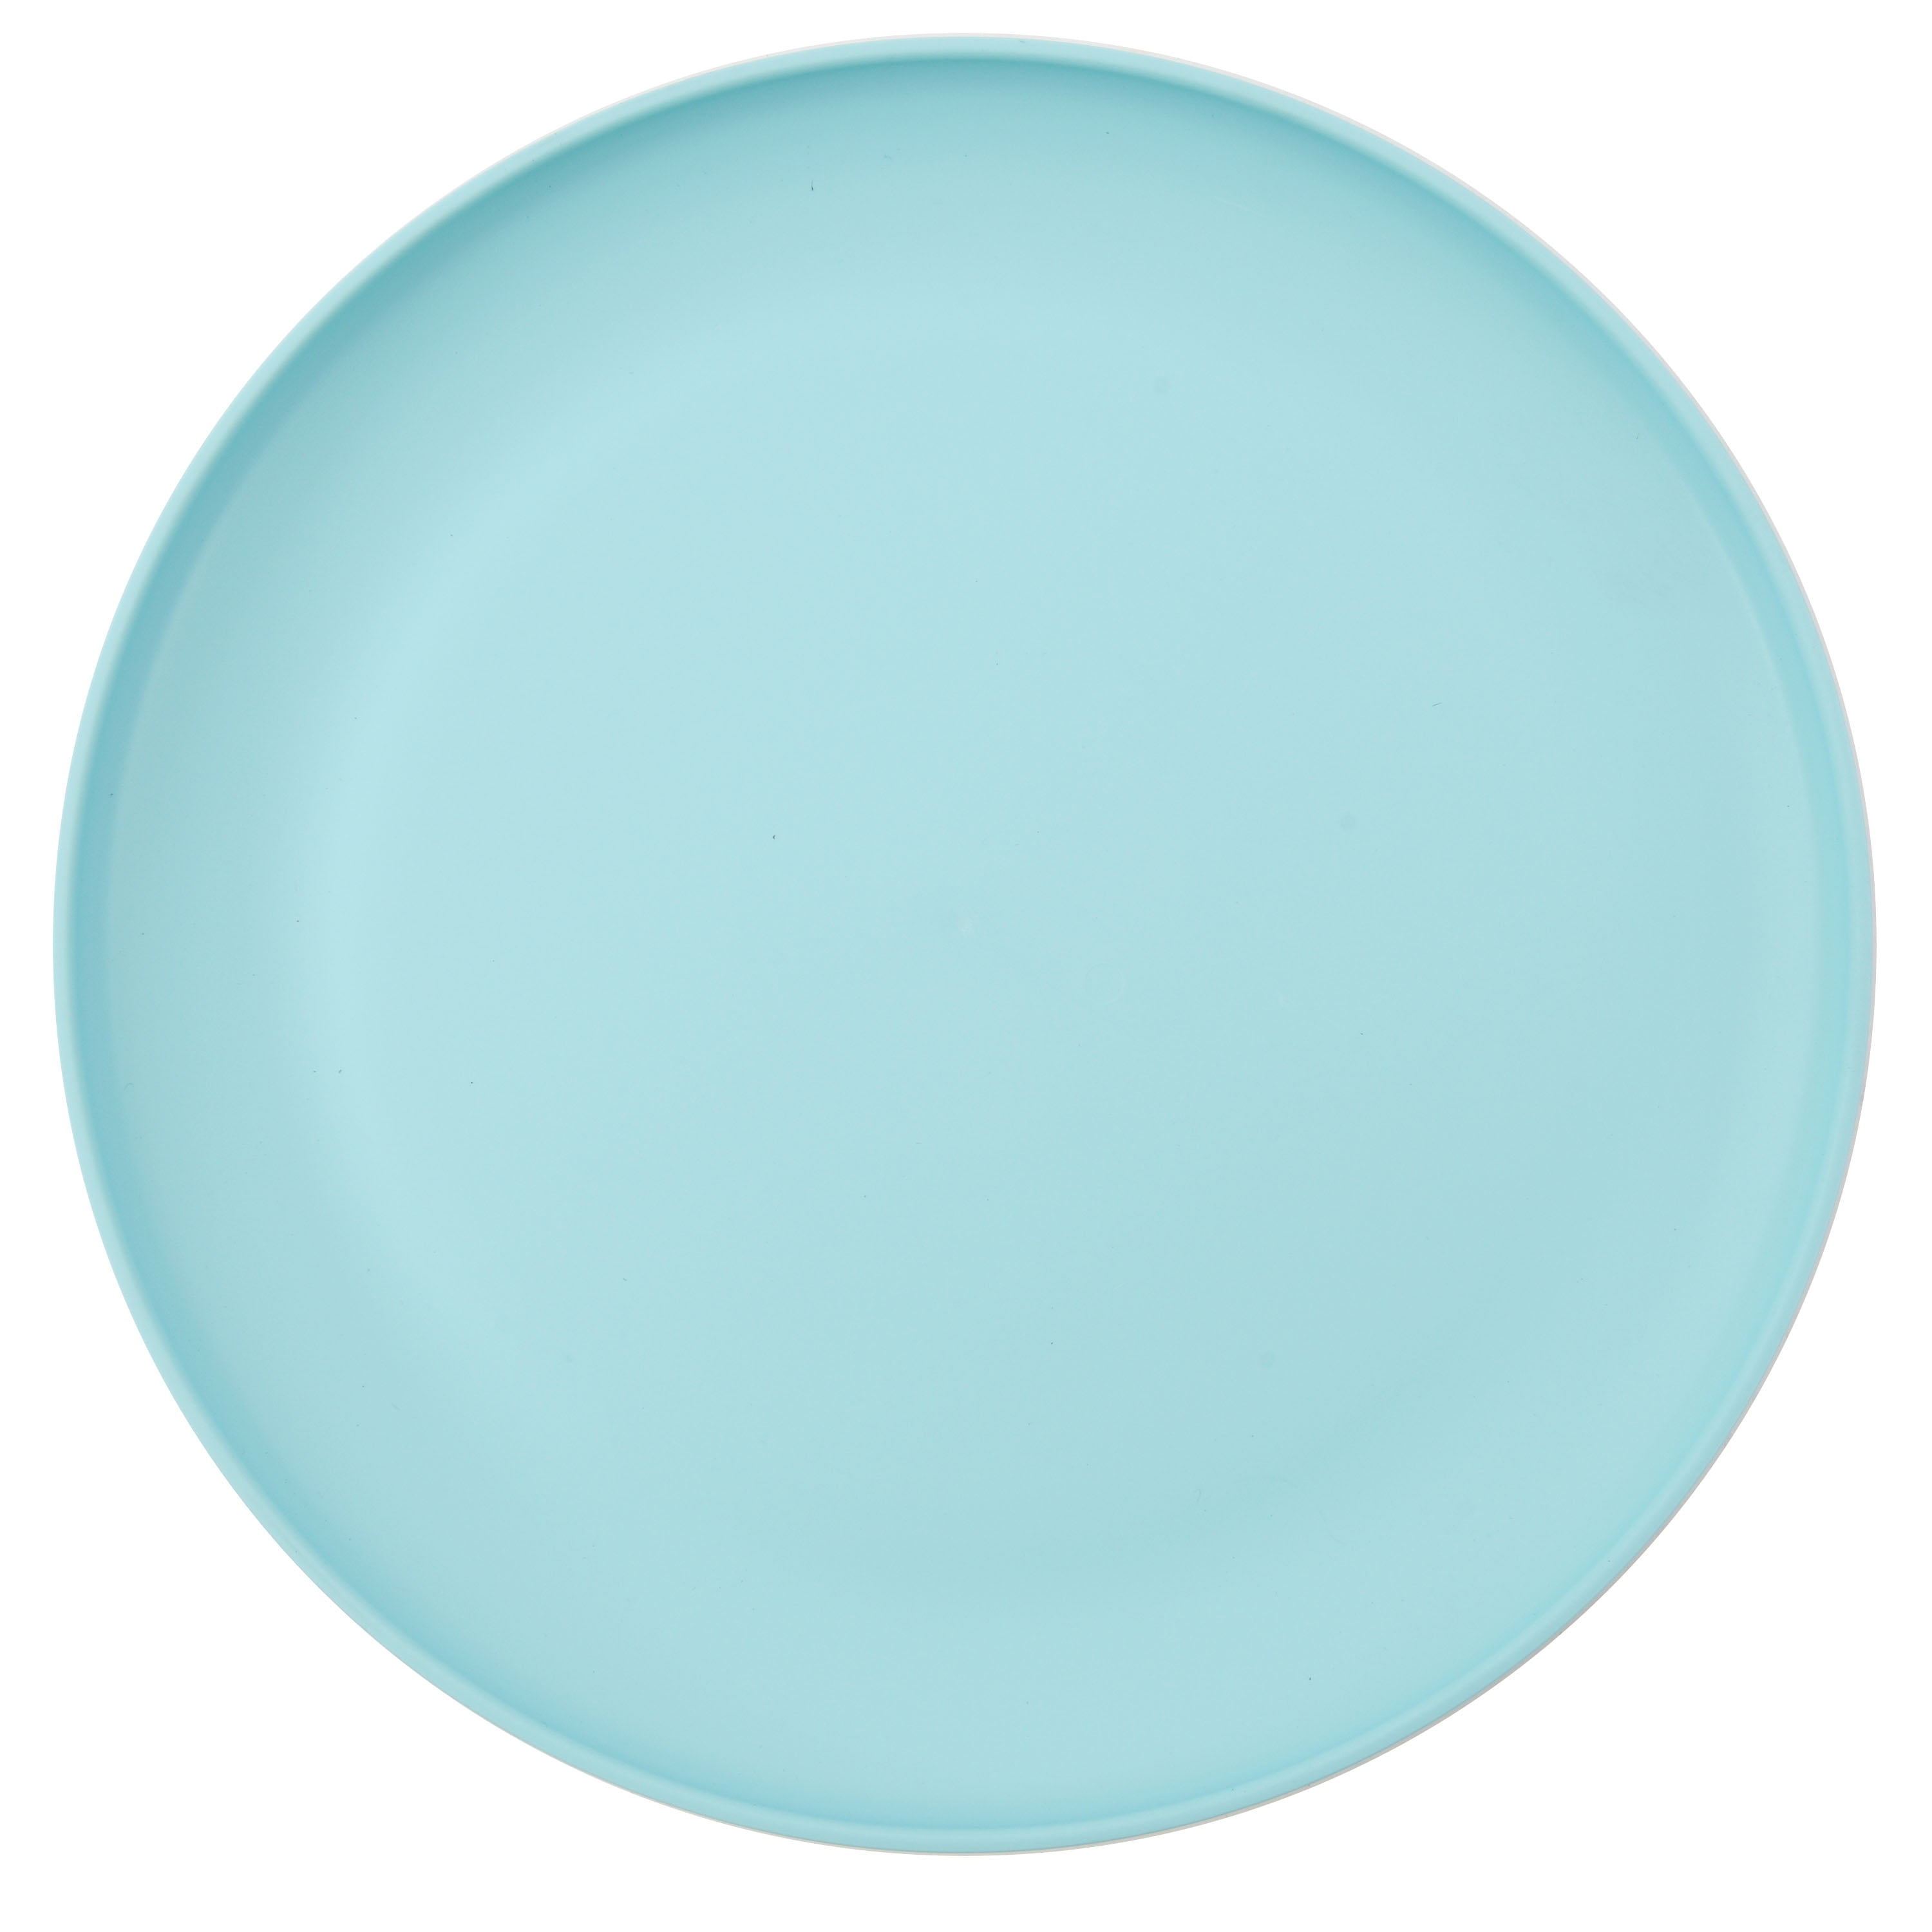 Mainstays 10.5-Inch Plastic Dinner Plate, Teal